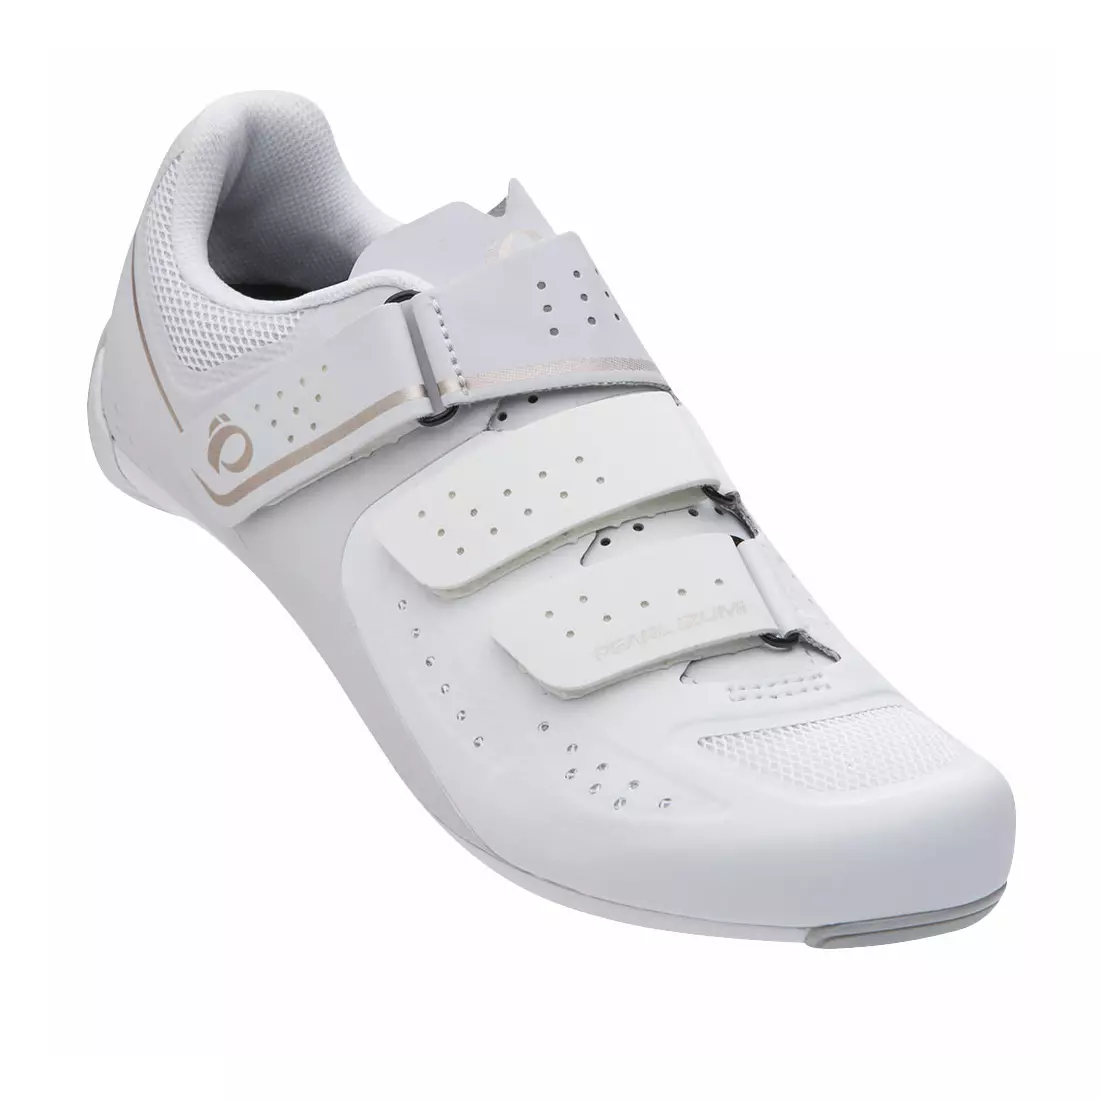 PEARL IZUMI SELECT Road V5 15201802 - women's road cycling shoes, white/gray